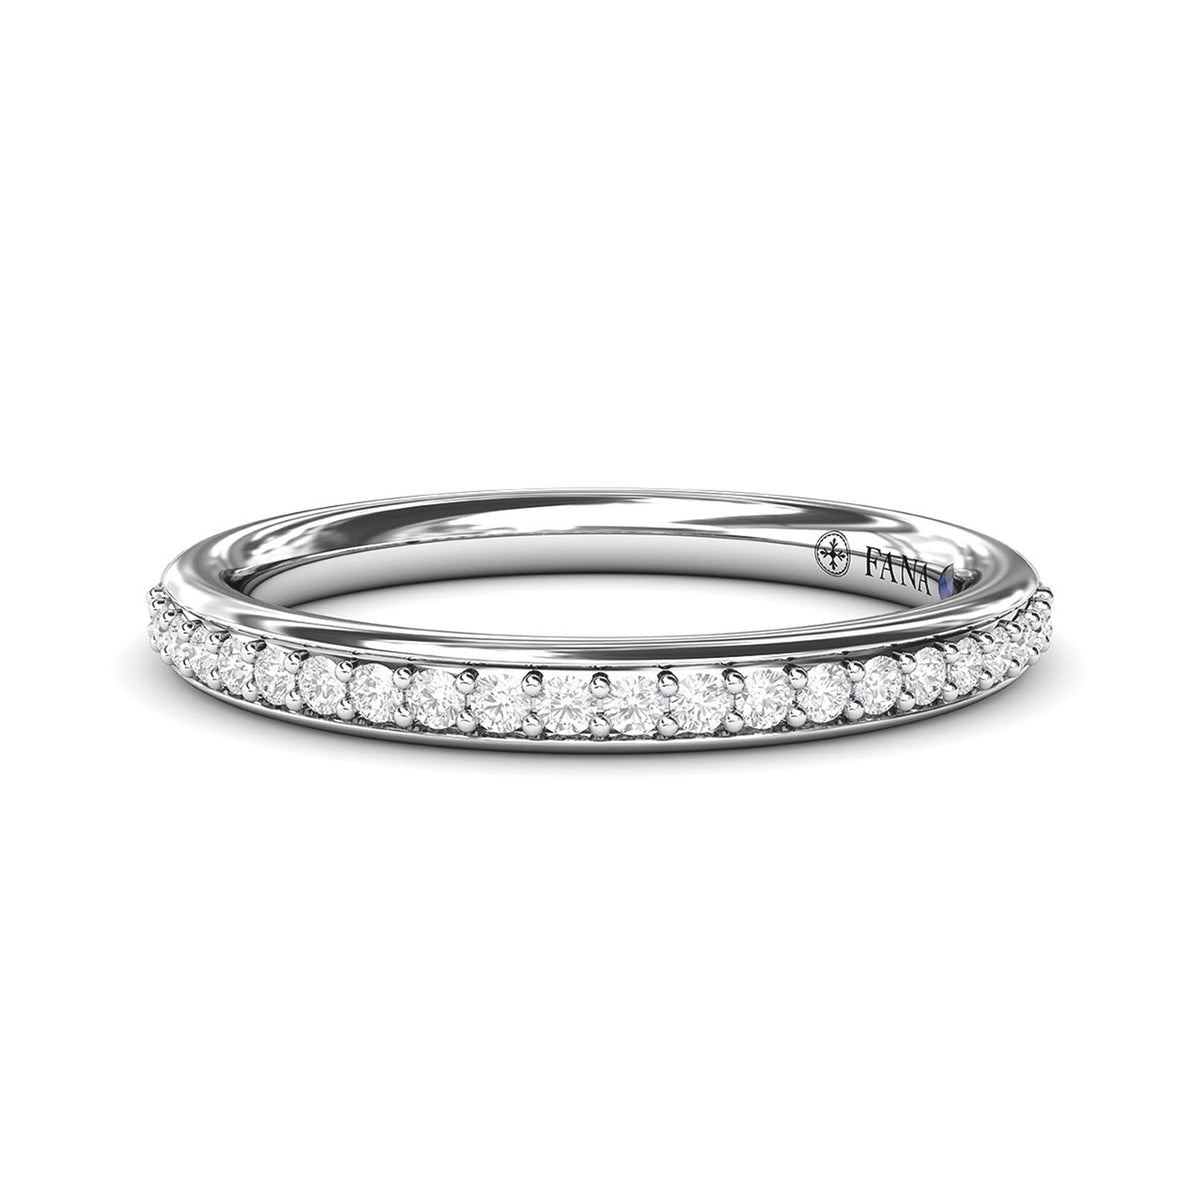 14Kt White Gold Channel Set Wedding Ring With 0.20cttw Natural Diamonds